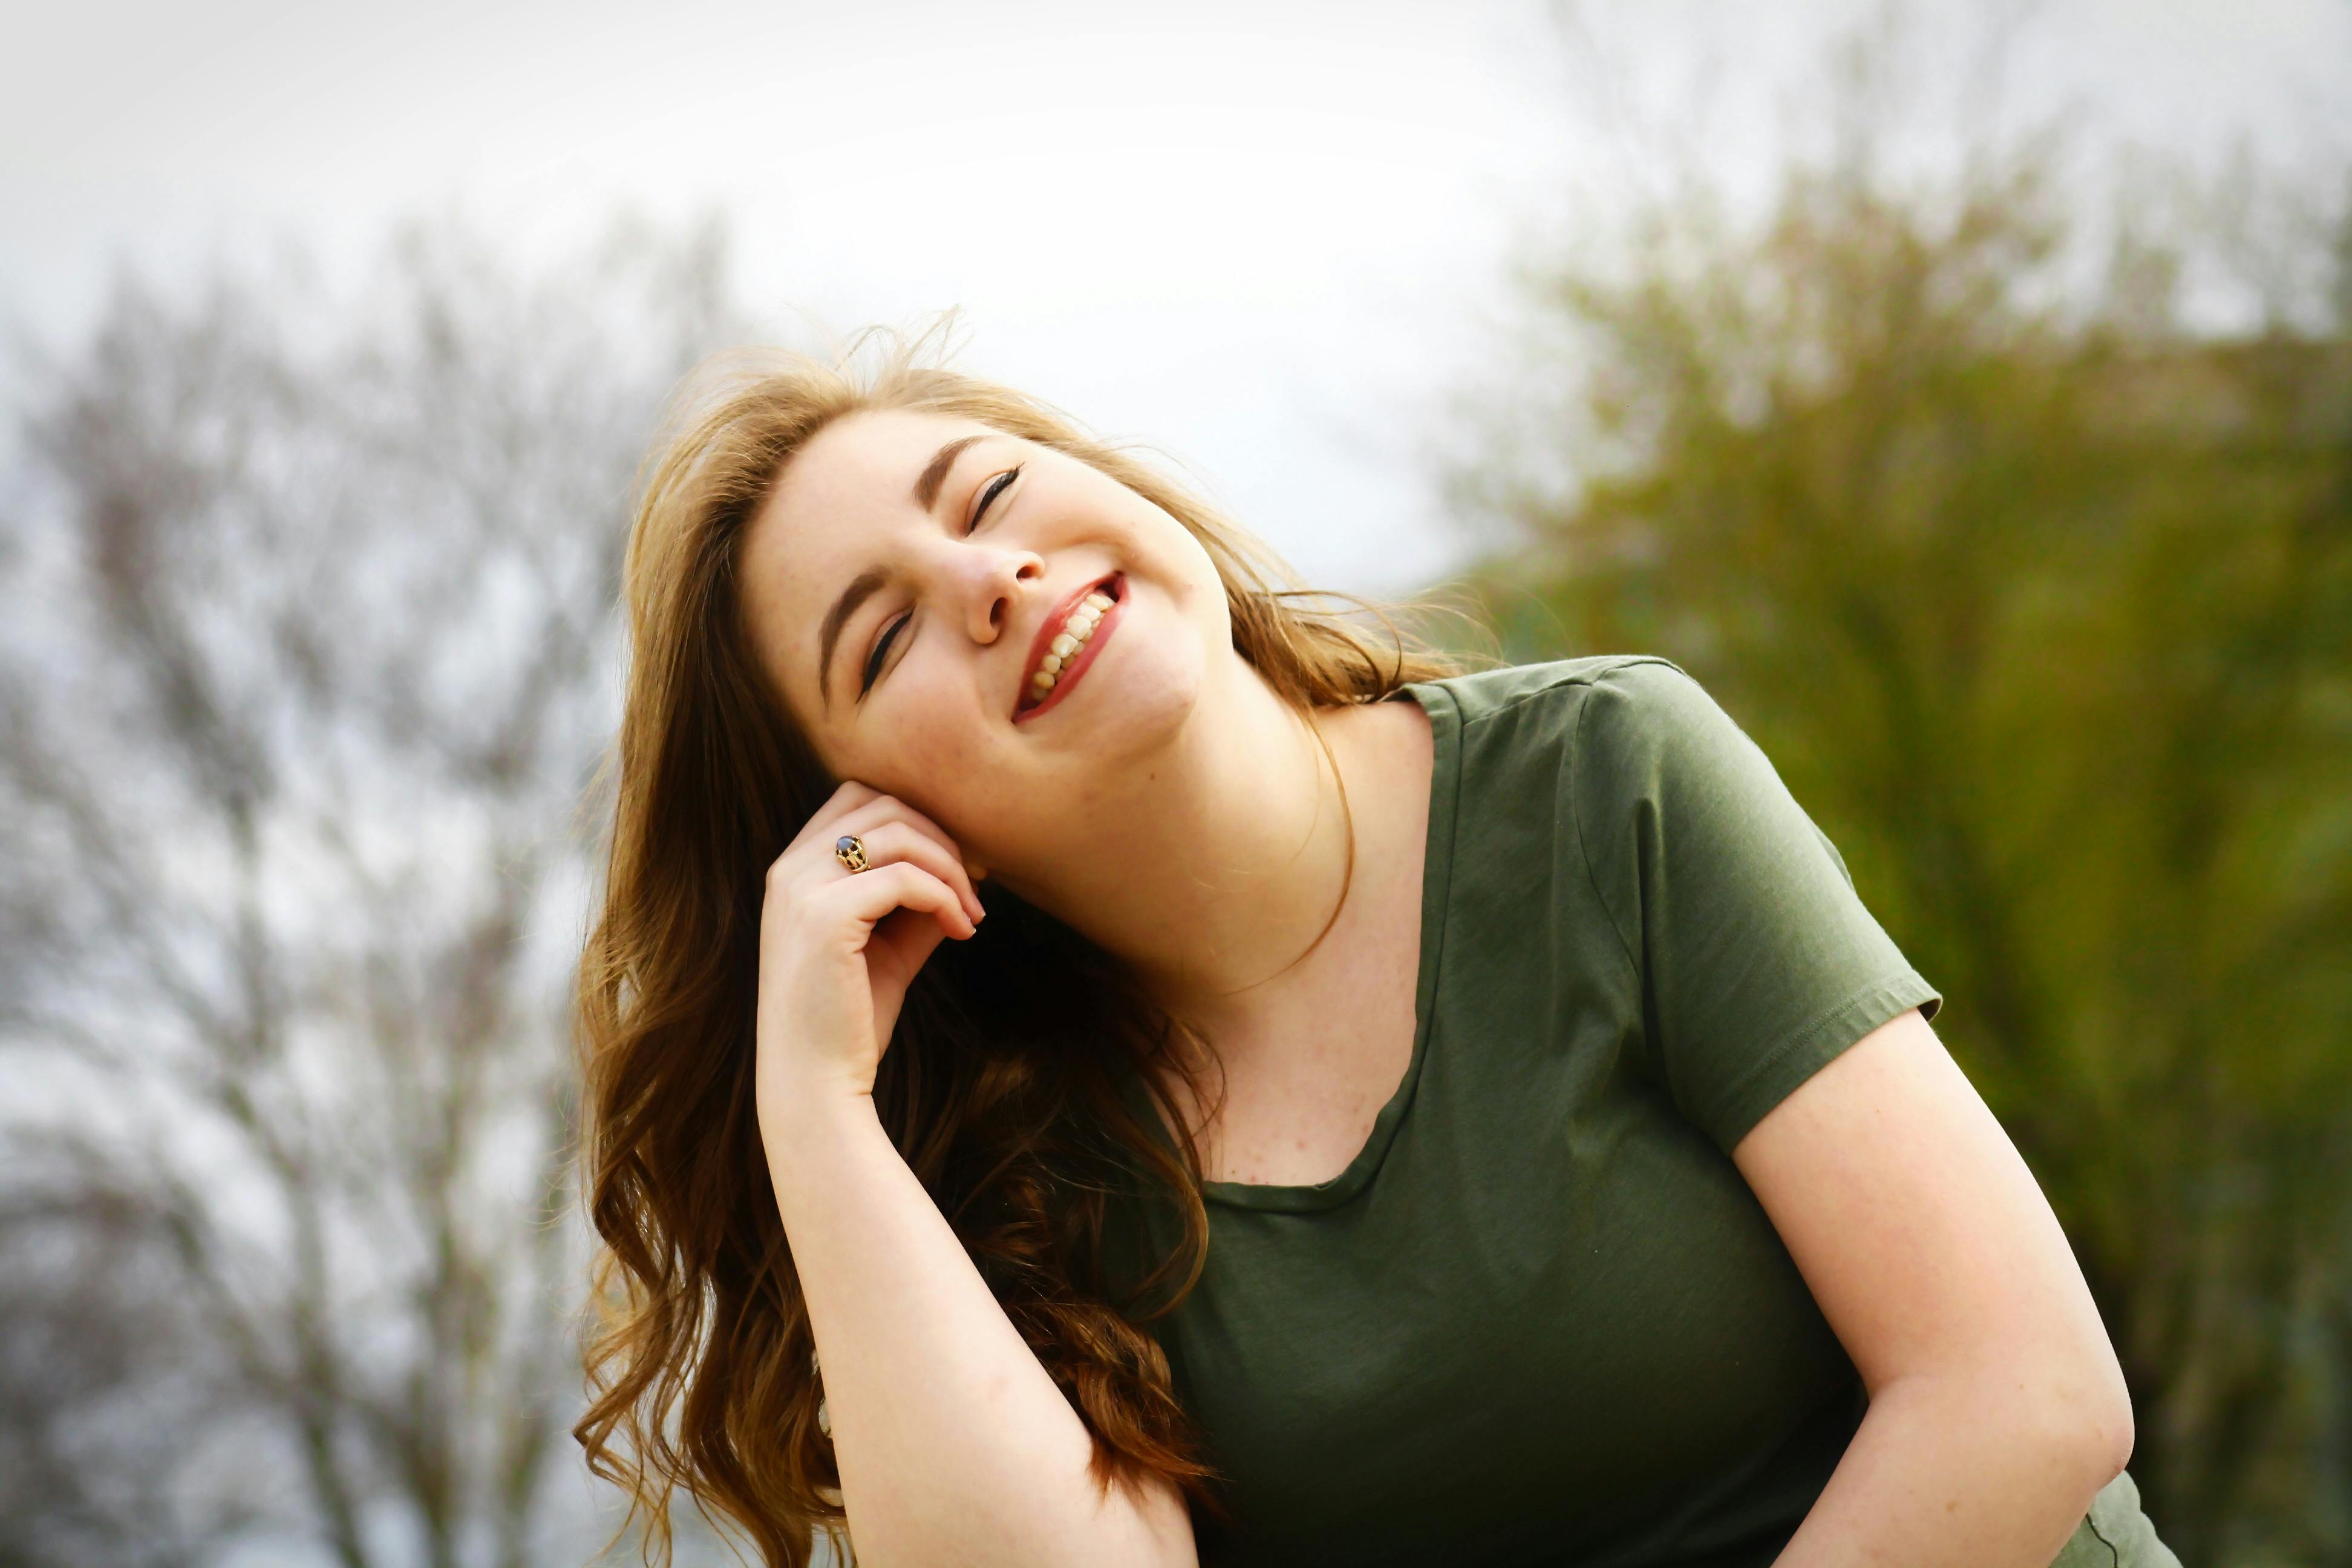 A woman looking happy with her eyes closed while outside | Source: Pexels